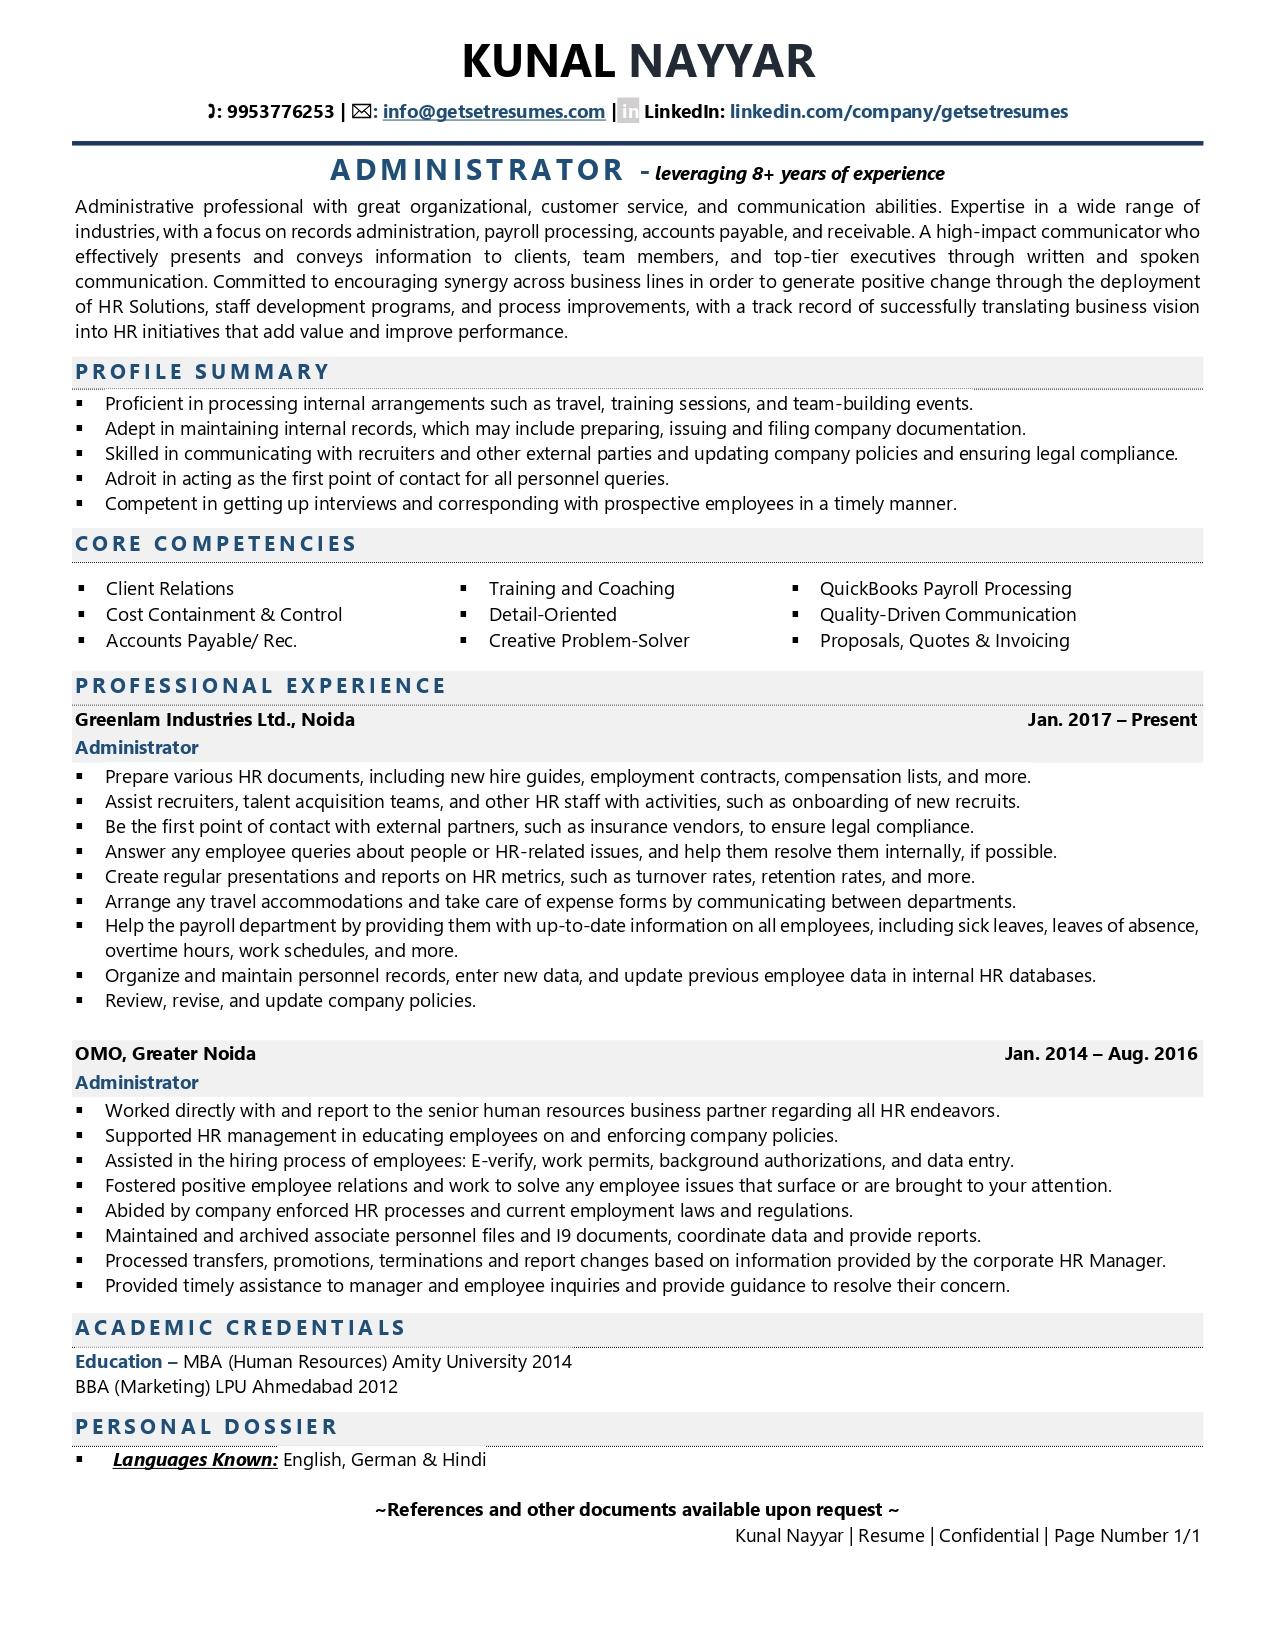 resume examples for administration